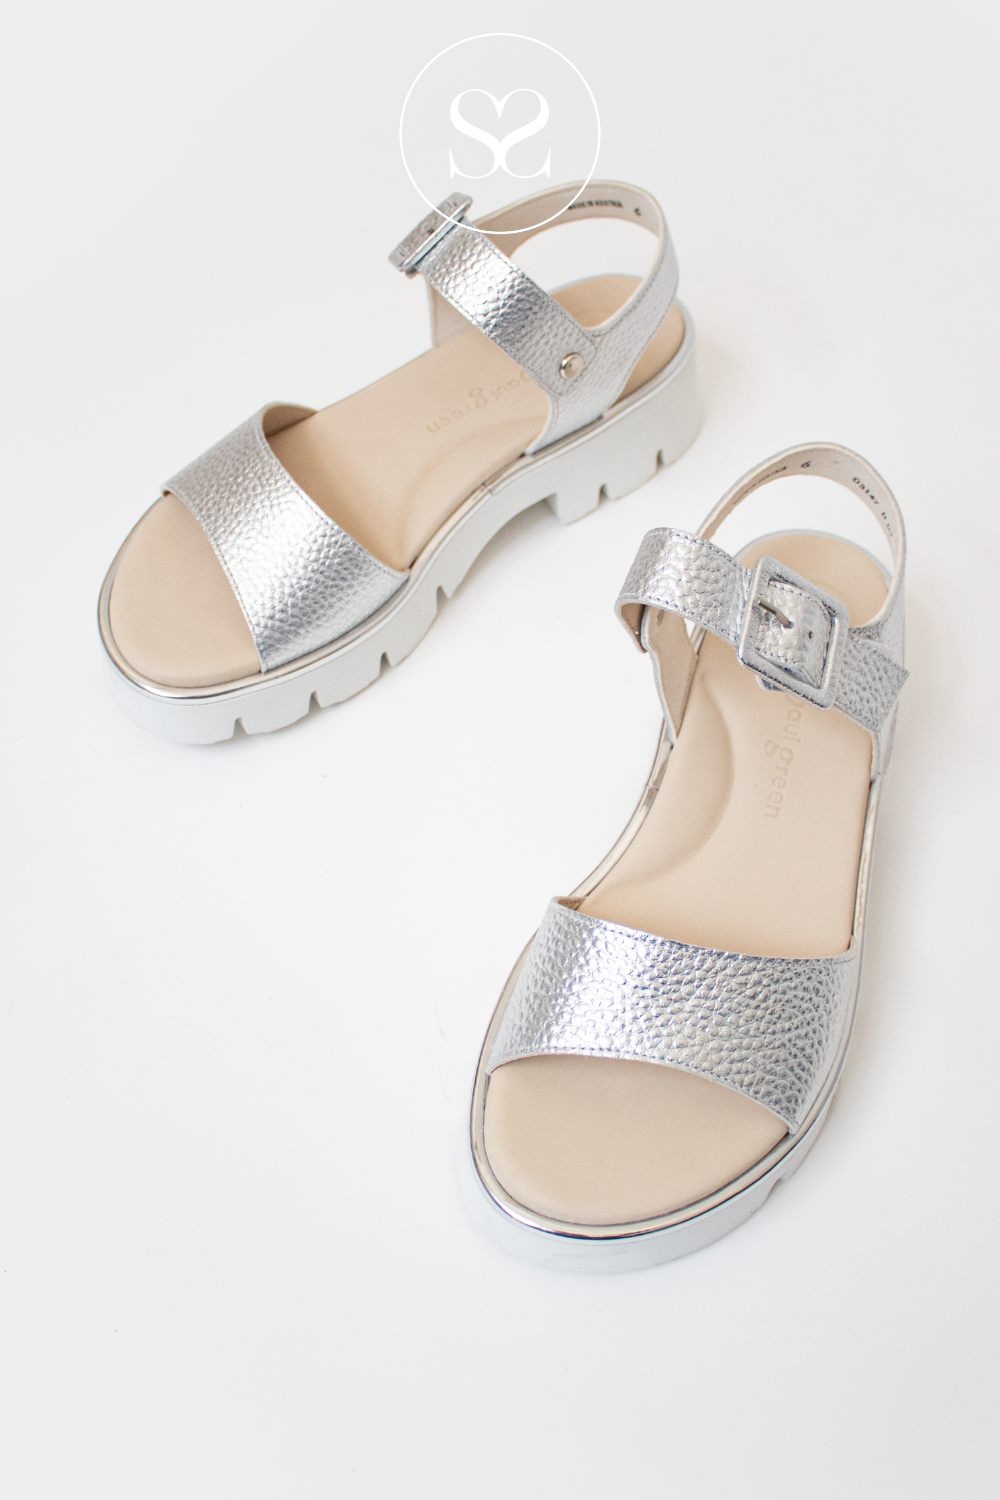 PAUL GREEN SILVER WALKING FLATFORM SOFT LEATHER SANDALS WITH ANKLE STRAP AND ADJUSTABLE STRAP